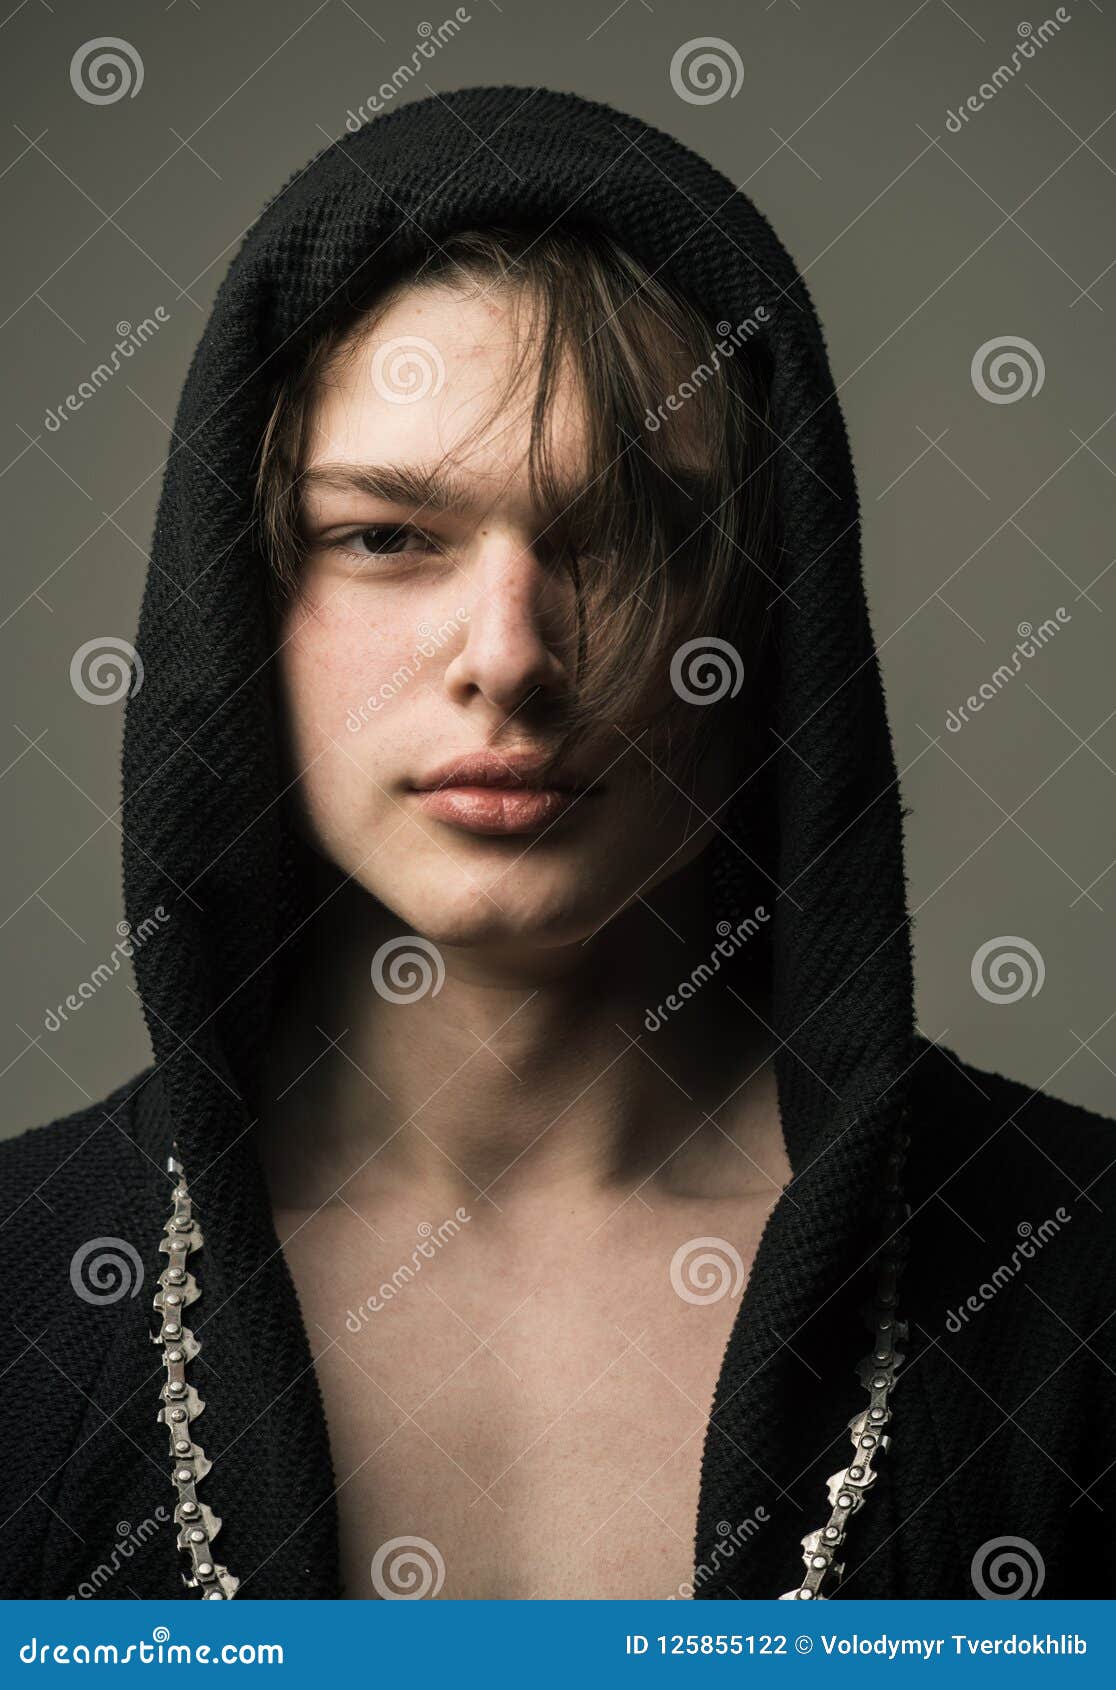 Handsome Boy in Black Hood with Medium Length Layered Dark Hair with Long  Chain Around His Neck Standing Isolated on Stock Photo - Image of hood, hair:  125855122